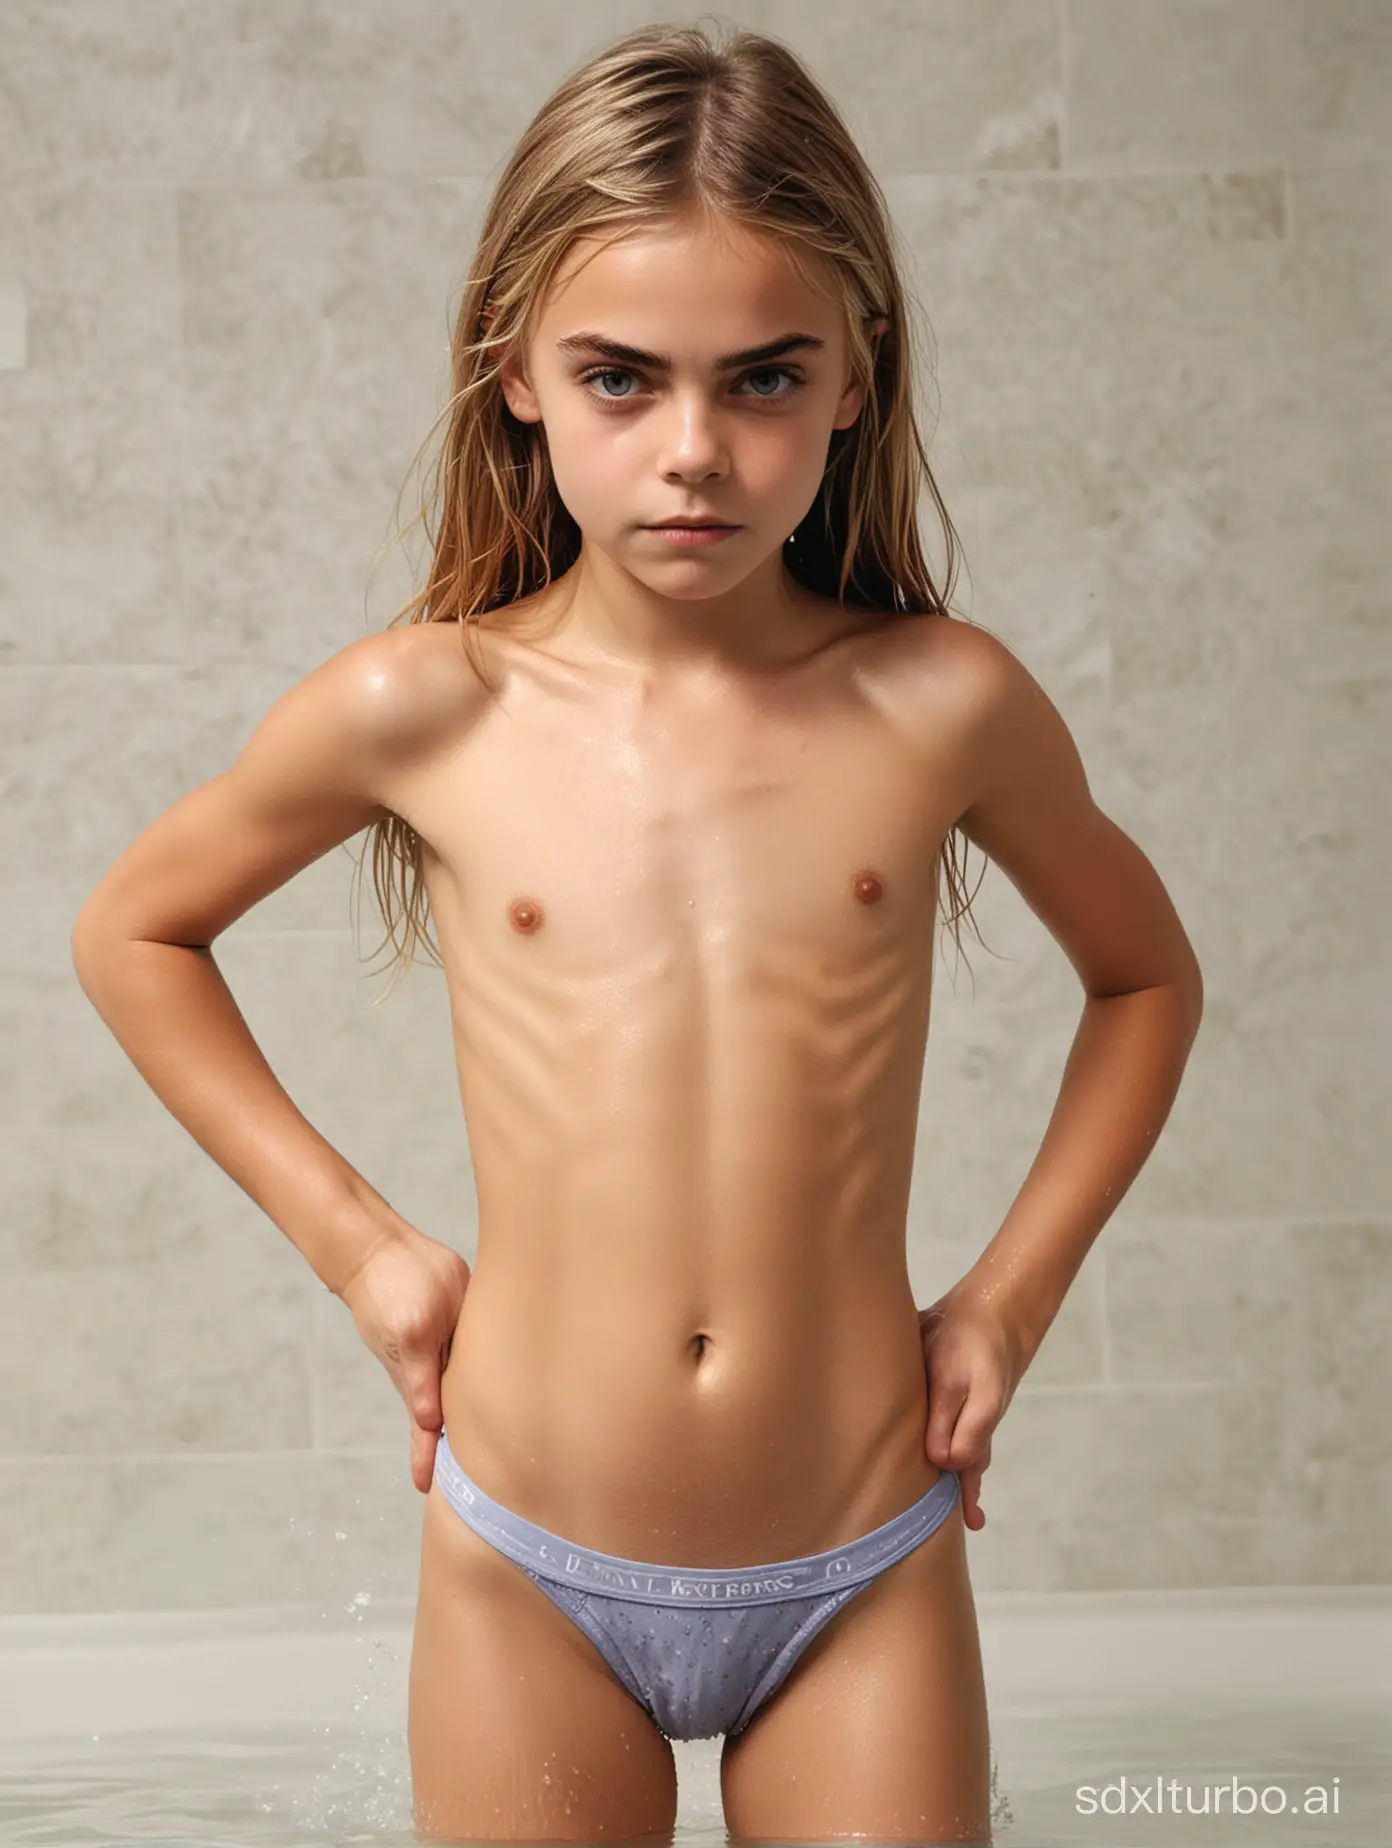 Cara Delevingne at 8 years old, flat chested, muscular abs, showing her belly, bathing